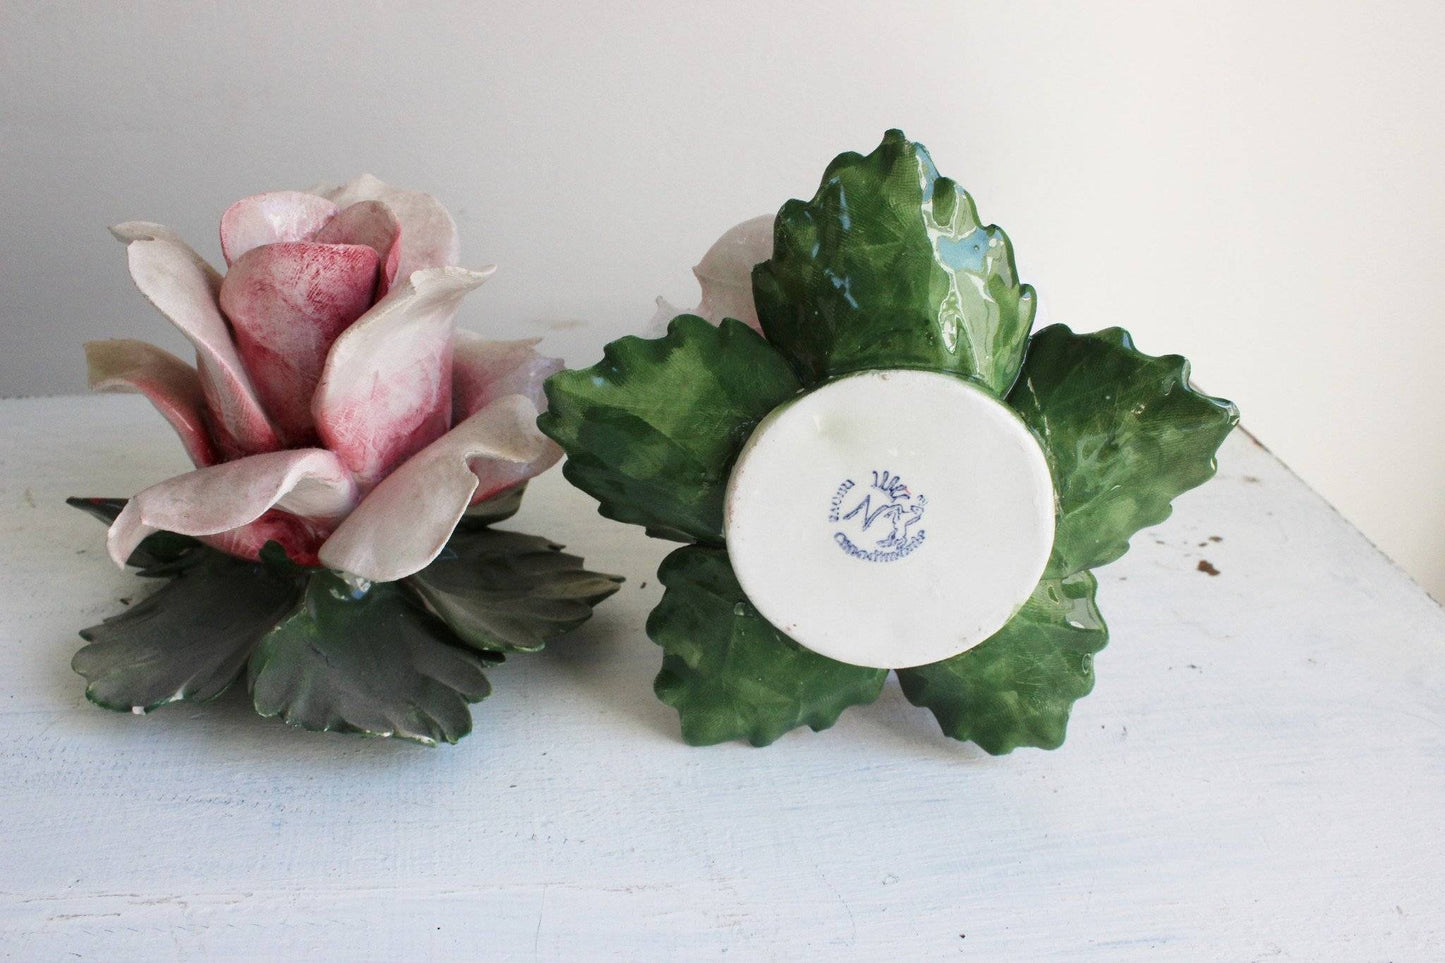 Vintage 1960s Porcelain Rose Candle Holders, Nuova Capodimonte-Mint Chips Vintage Home Goods-Candle Holder,Candleholder,Collectible,Nuova Capodimonte,Pink,Porcelain,Rose,Vintage